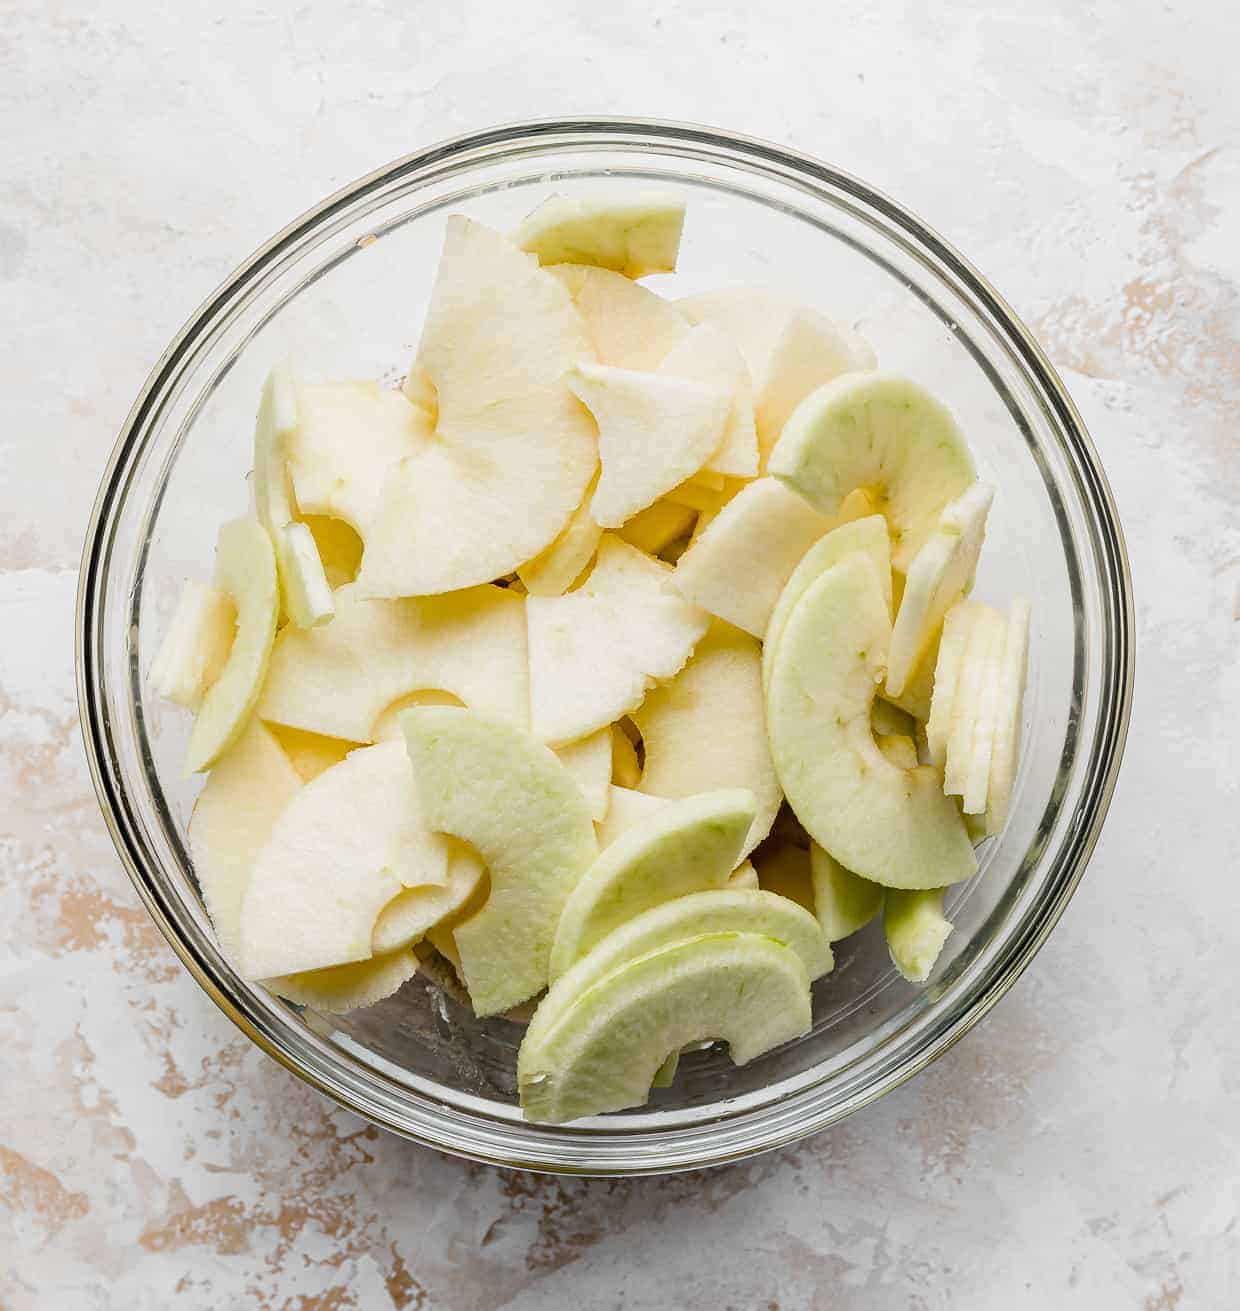 Sliced apples in a glass bowl.